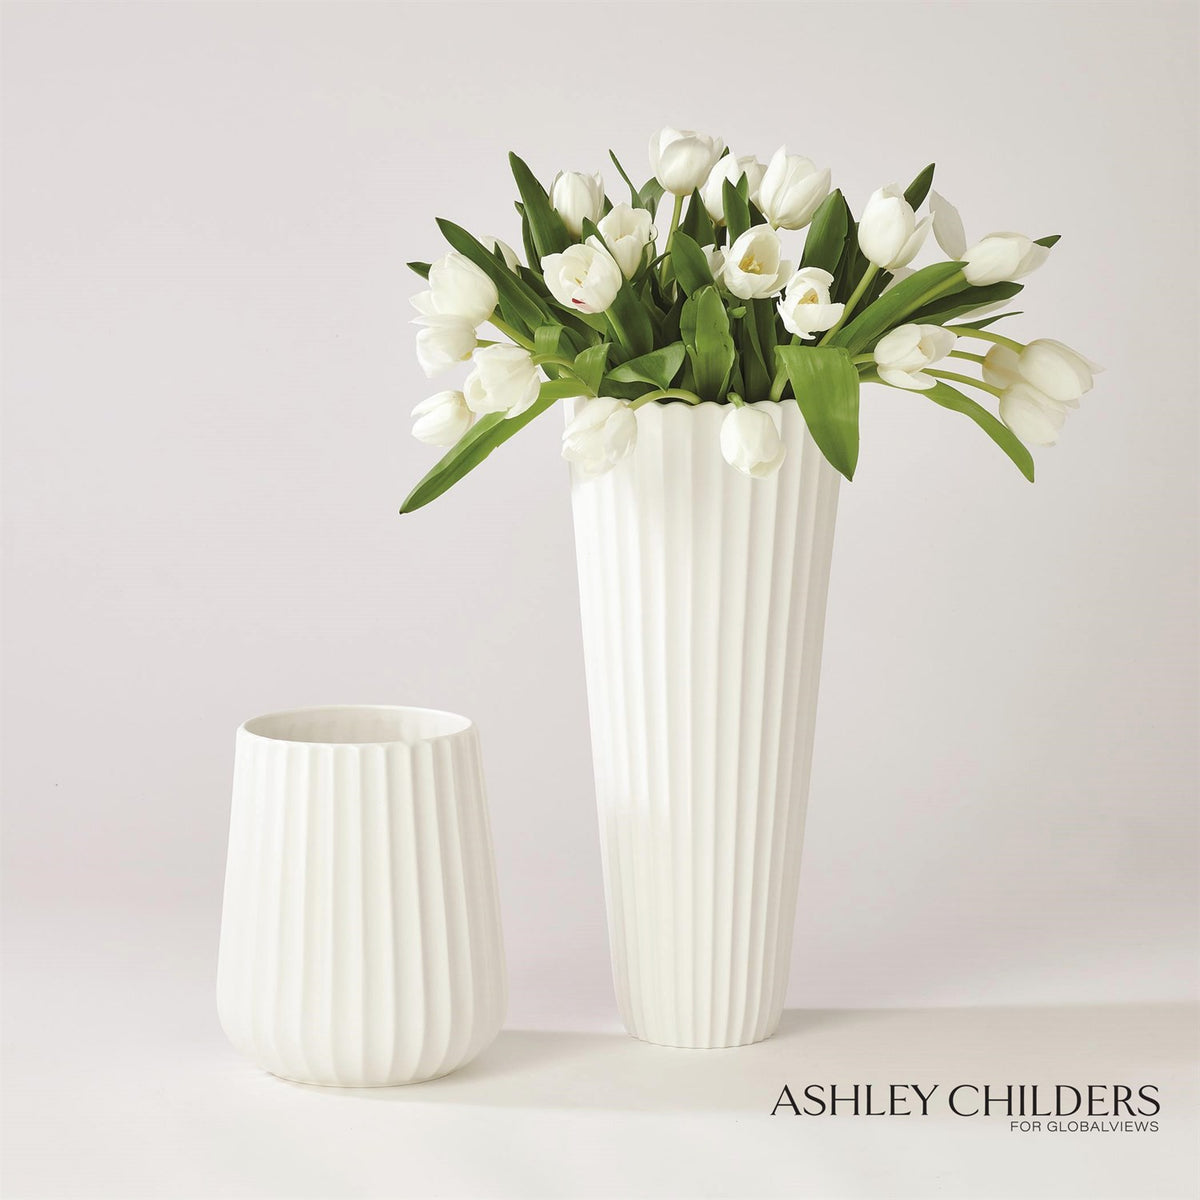 Small and large fluted white vases with tulips